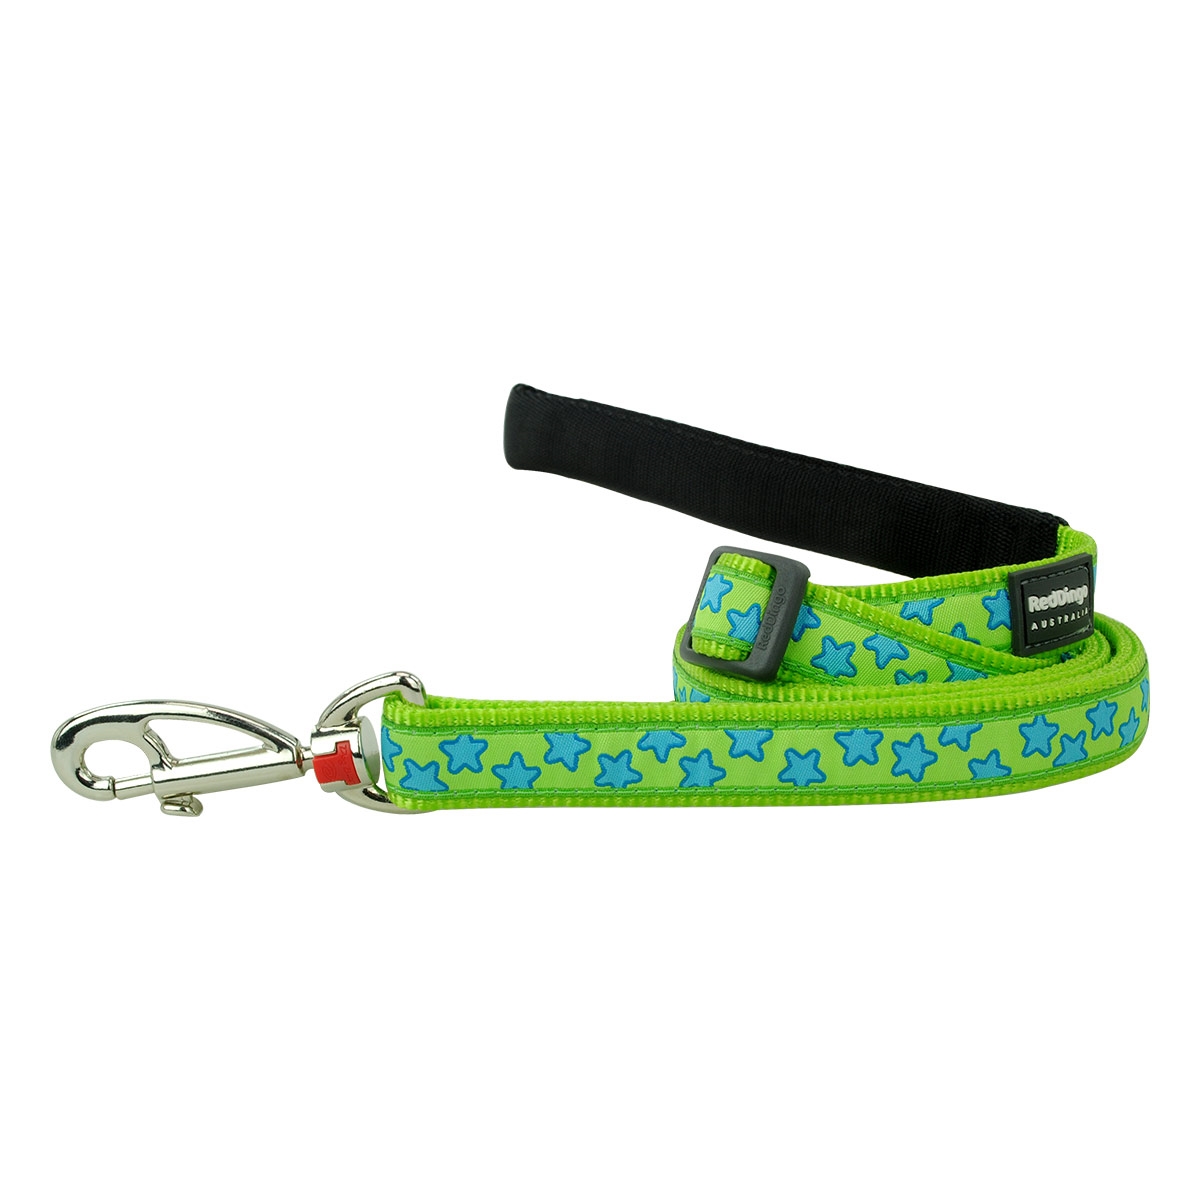 Picture of Red Dingo L6-ST-LG-20 Dog Lead Design Star Lime Green - Medium  6ft